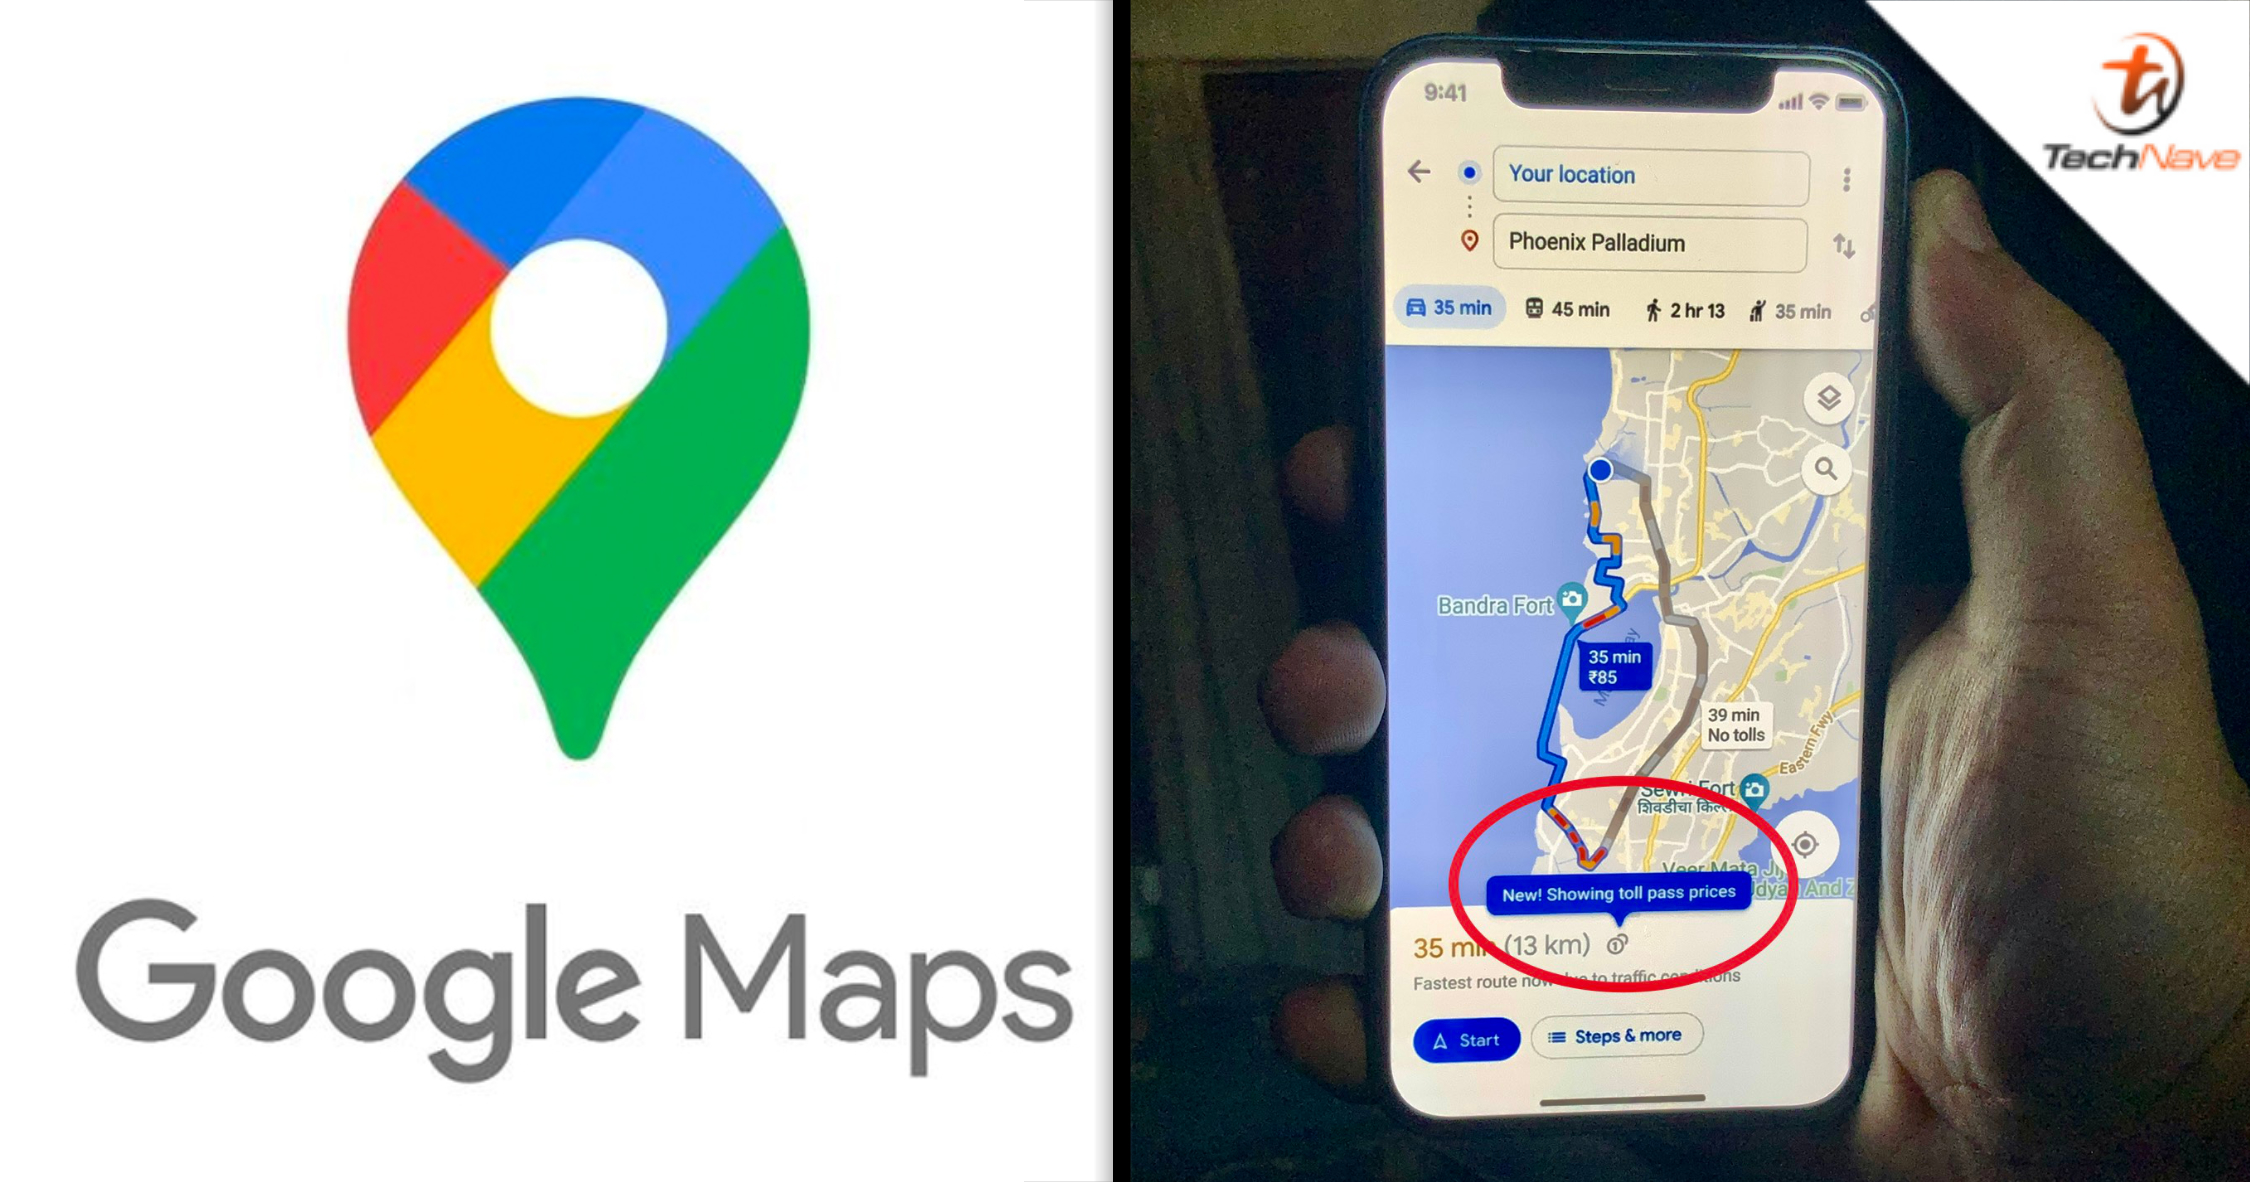 Google Maps will start showing toll prices and more navigation details on the app soon